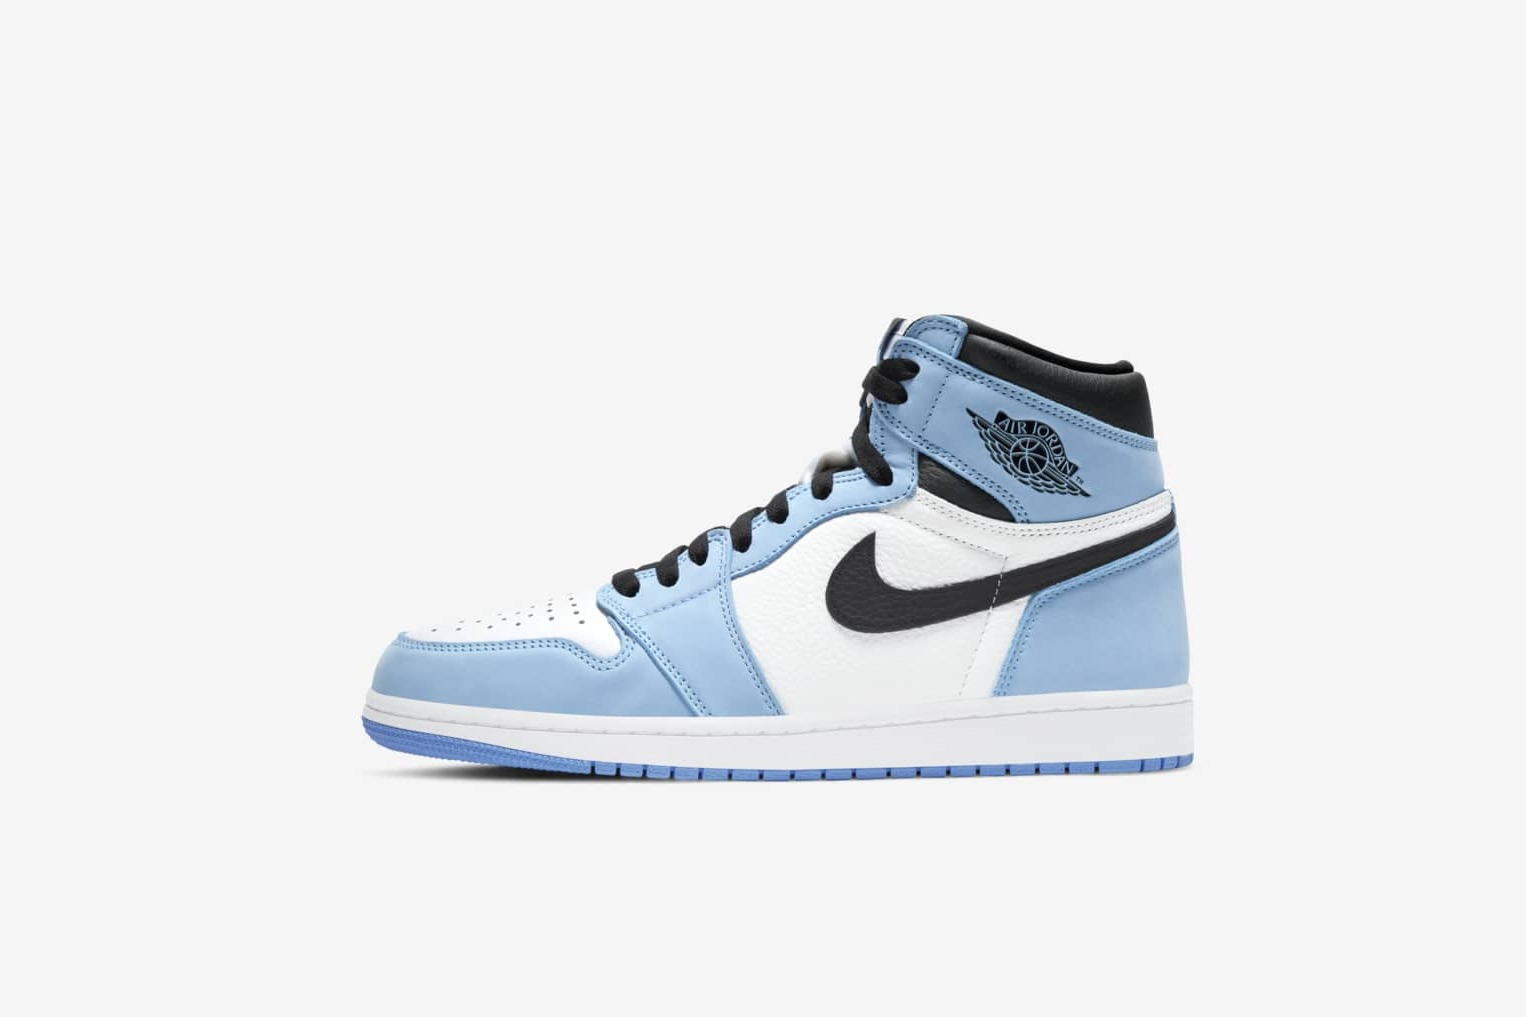 Være omhyggelig Smitsom sygdom Air Jordan 1 Retro High OG 'University Blue' Release Date, Pics and Retail  Price | Bleacher Report | Latest News, Videos and Highlights